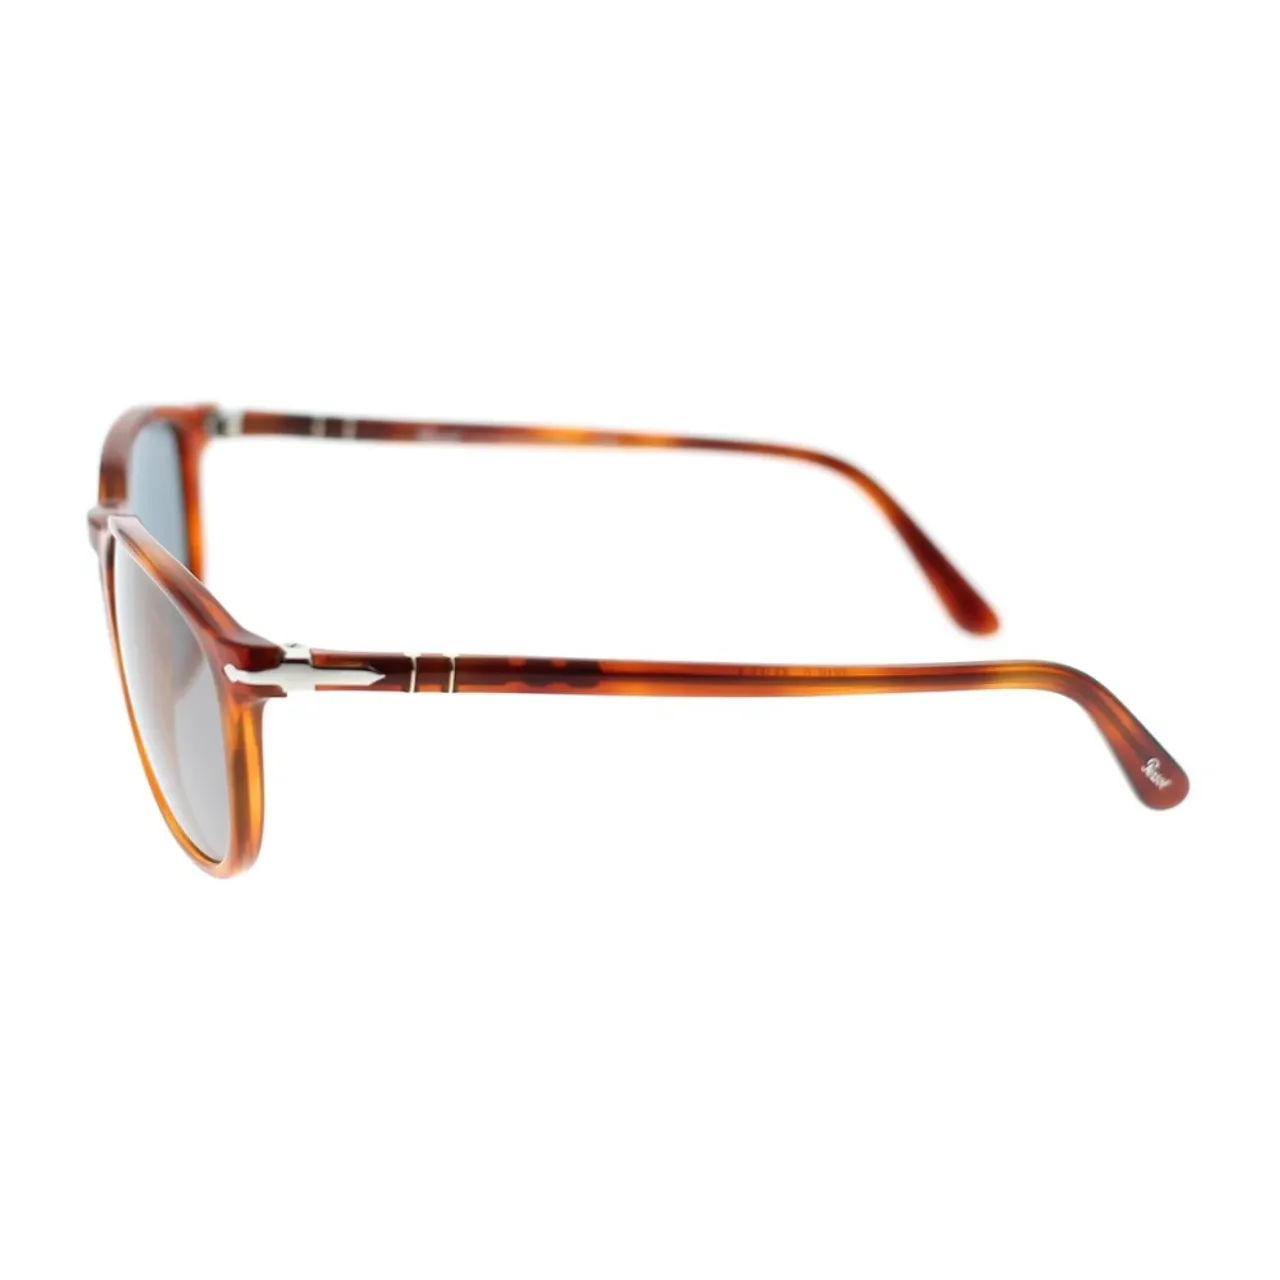 Persol , Handcrafted Italian Sunglasses with Iconic Arrows ,Brown unisex, Sizes: